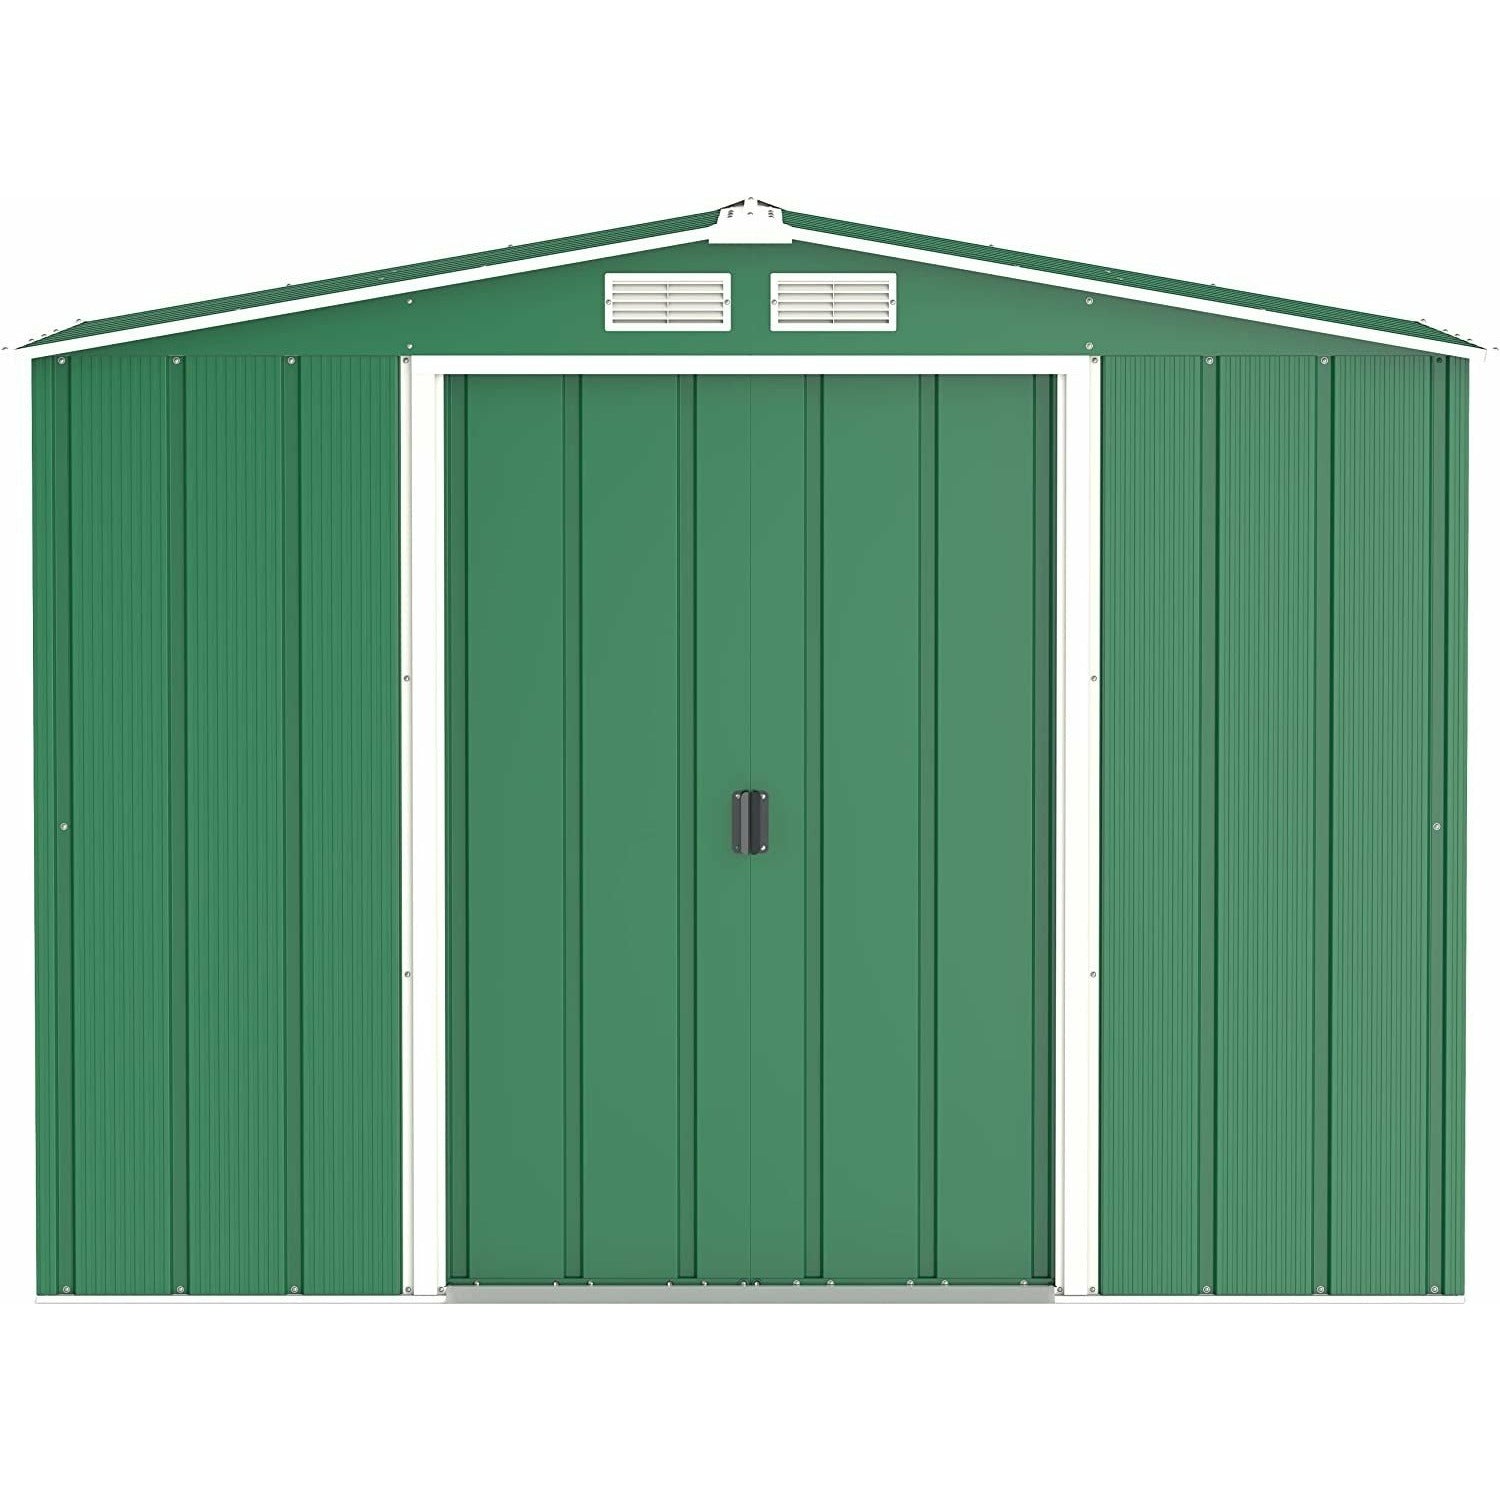 Sapphire 8x8 Metal Shed- Green